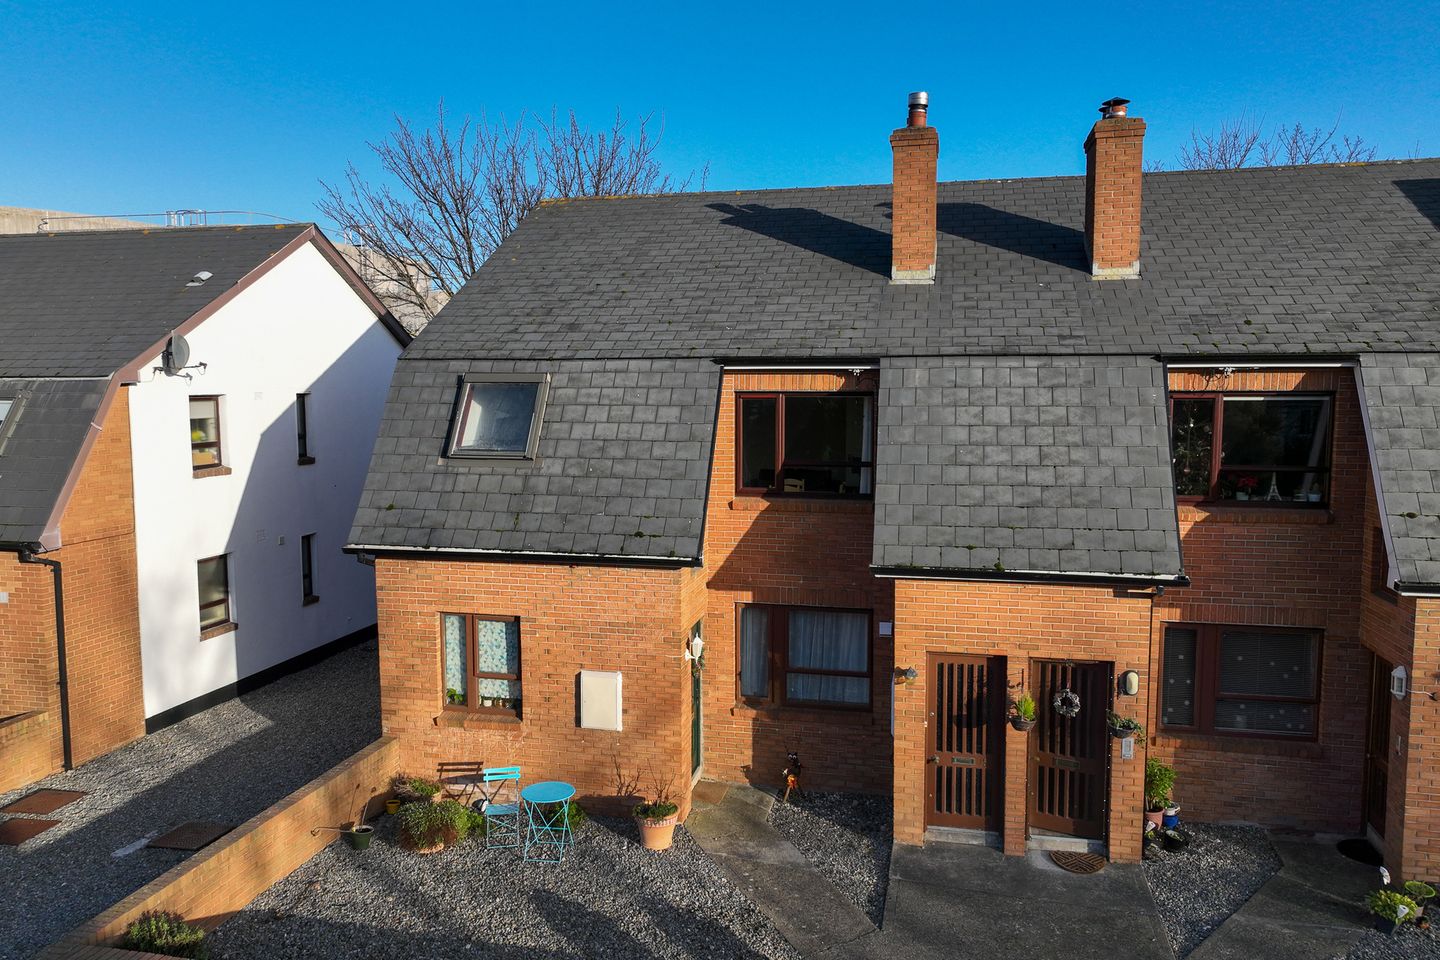 15 Seapoint Court, Seapoint Road, Bray, Co. Wicklow